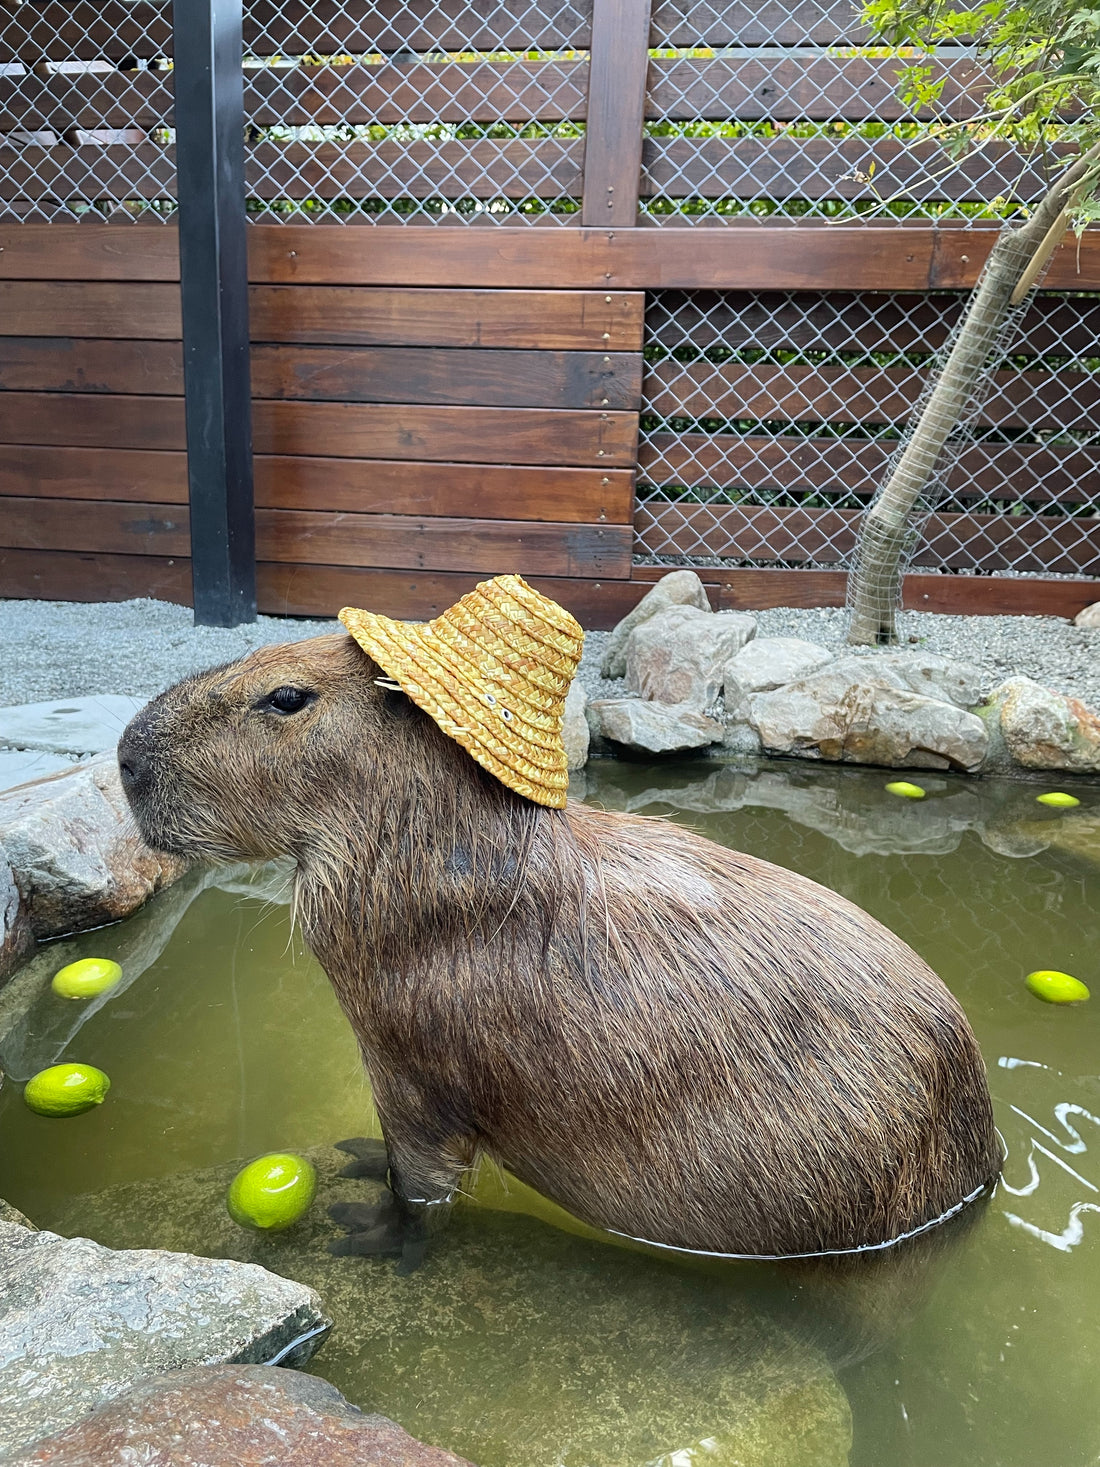 Ten Interesting Facts About The Capybara, The World's Largest Rodent